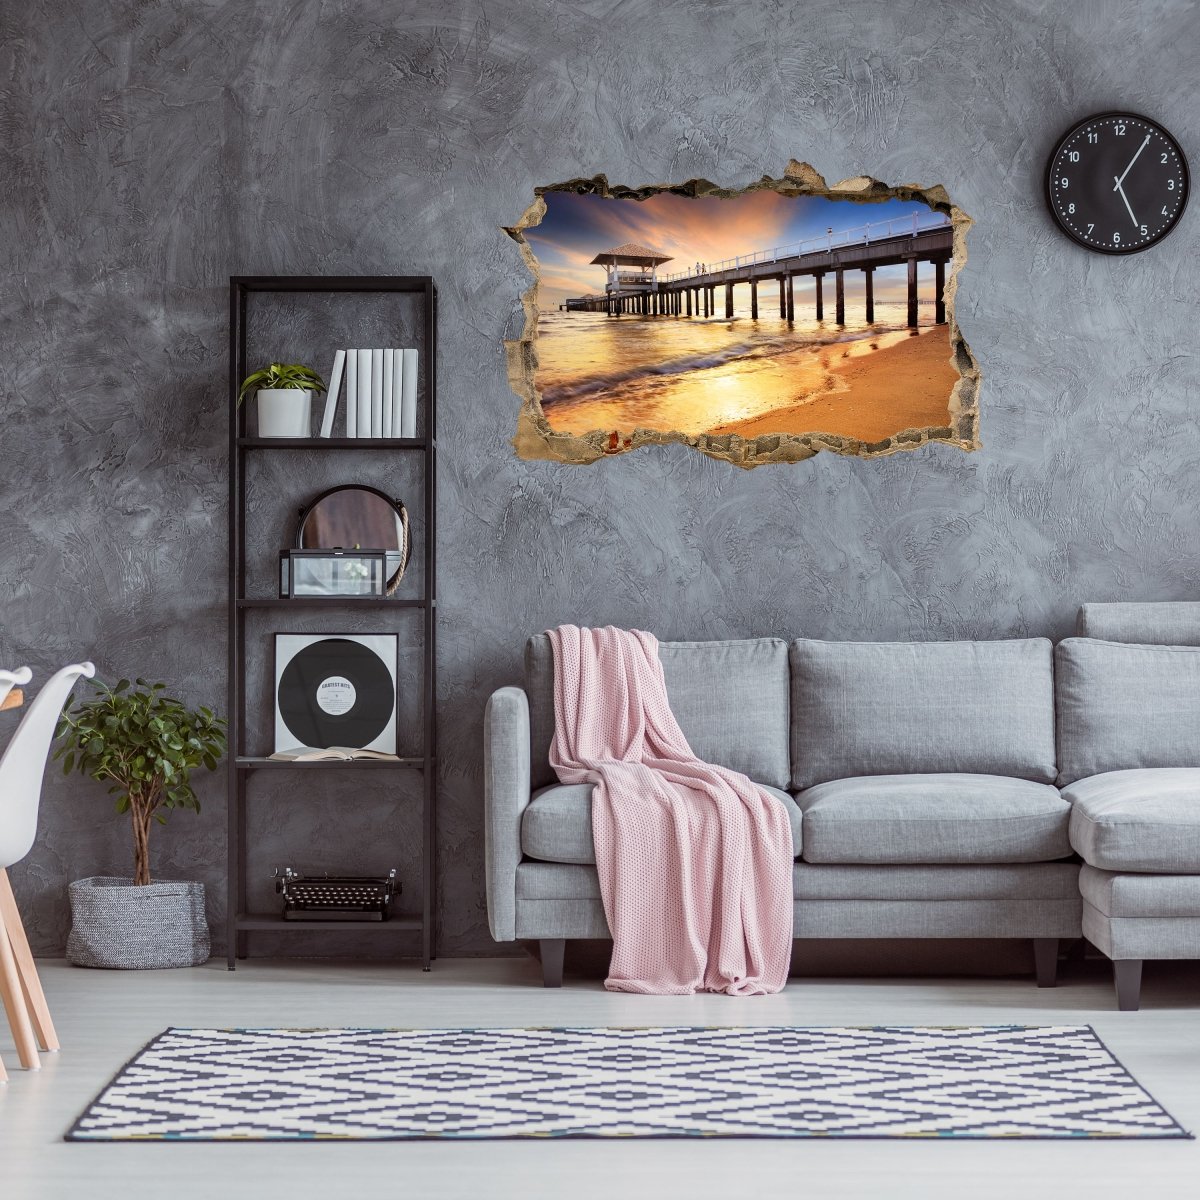 3D wall sticker pier into the sea, sunset - wall decal M1156